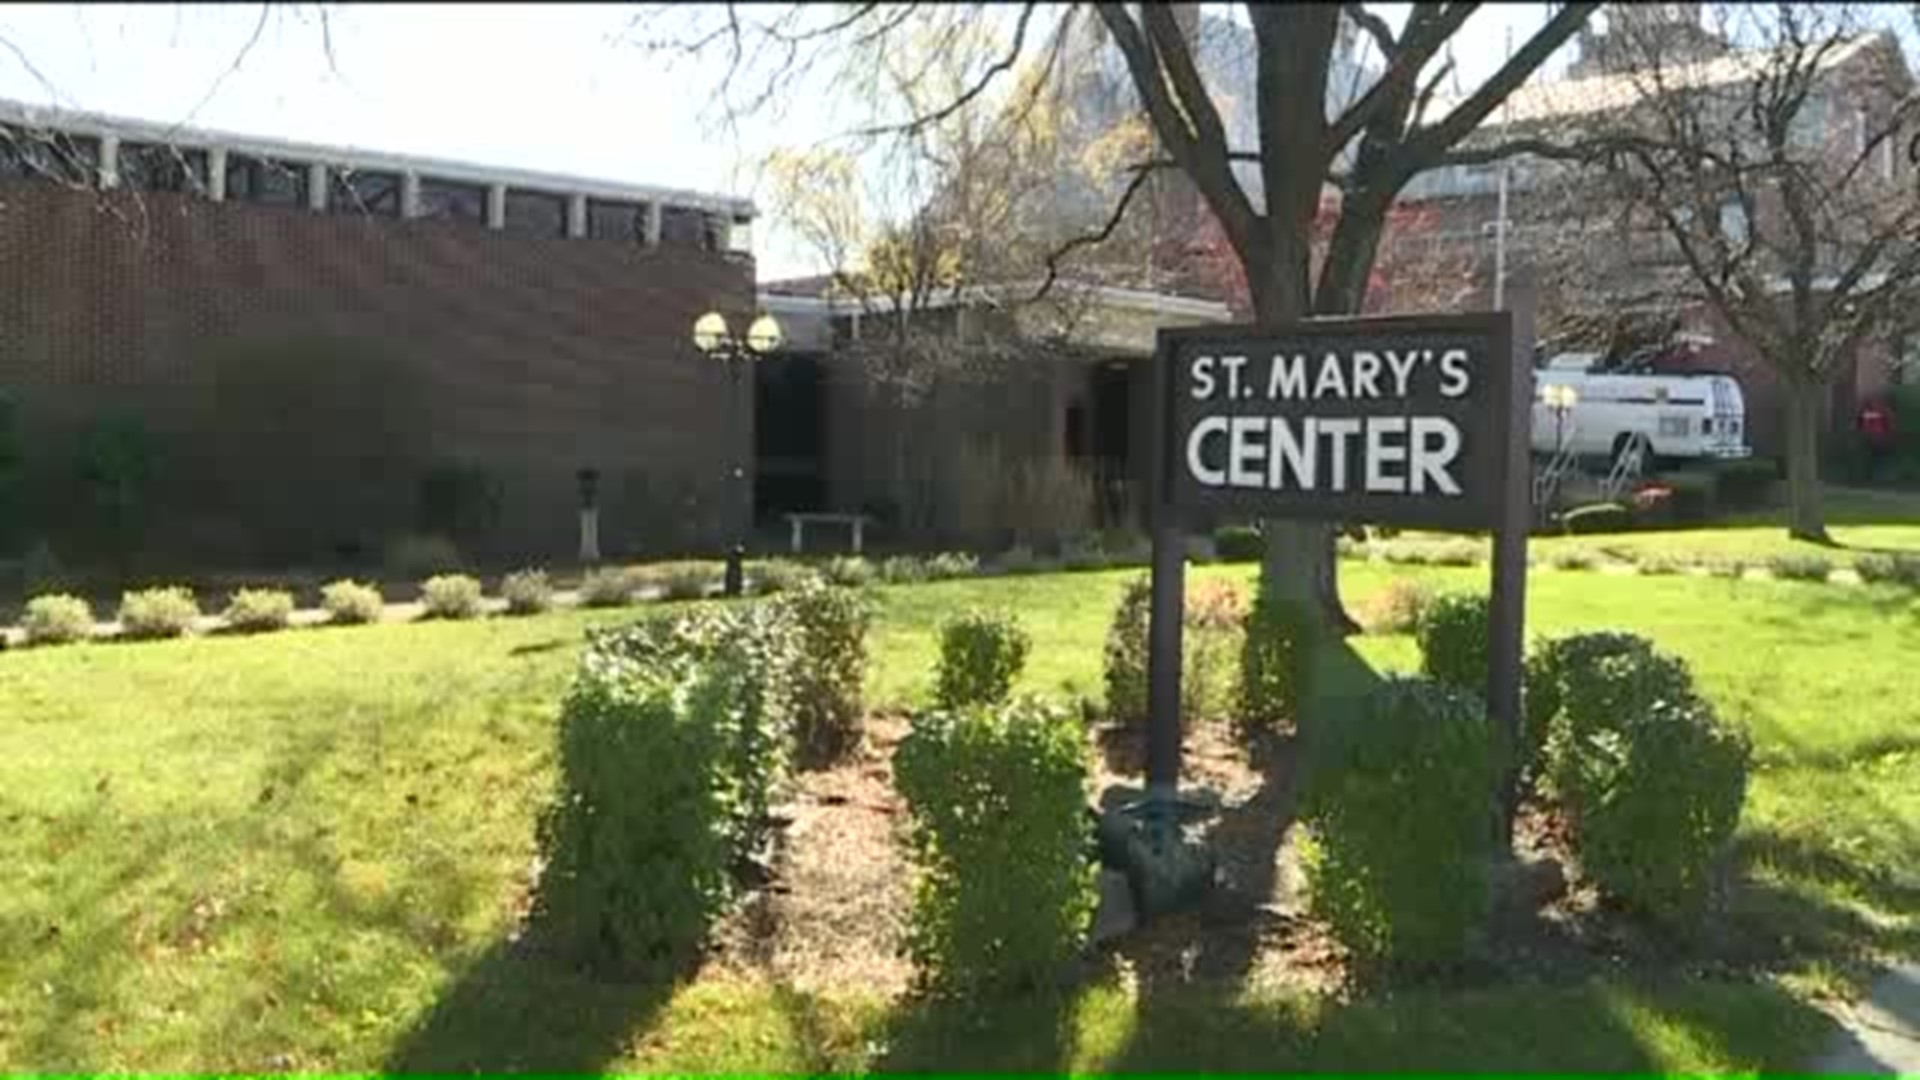 St. Mary's Center Saved From Sheriff's Sale